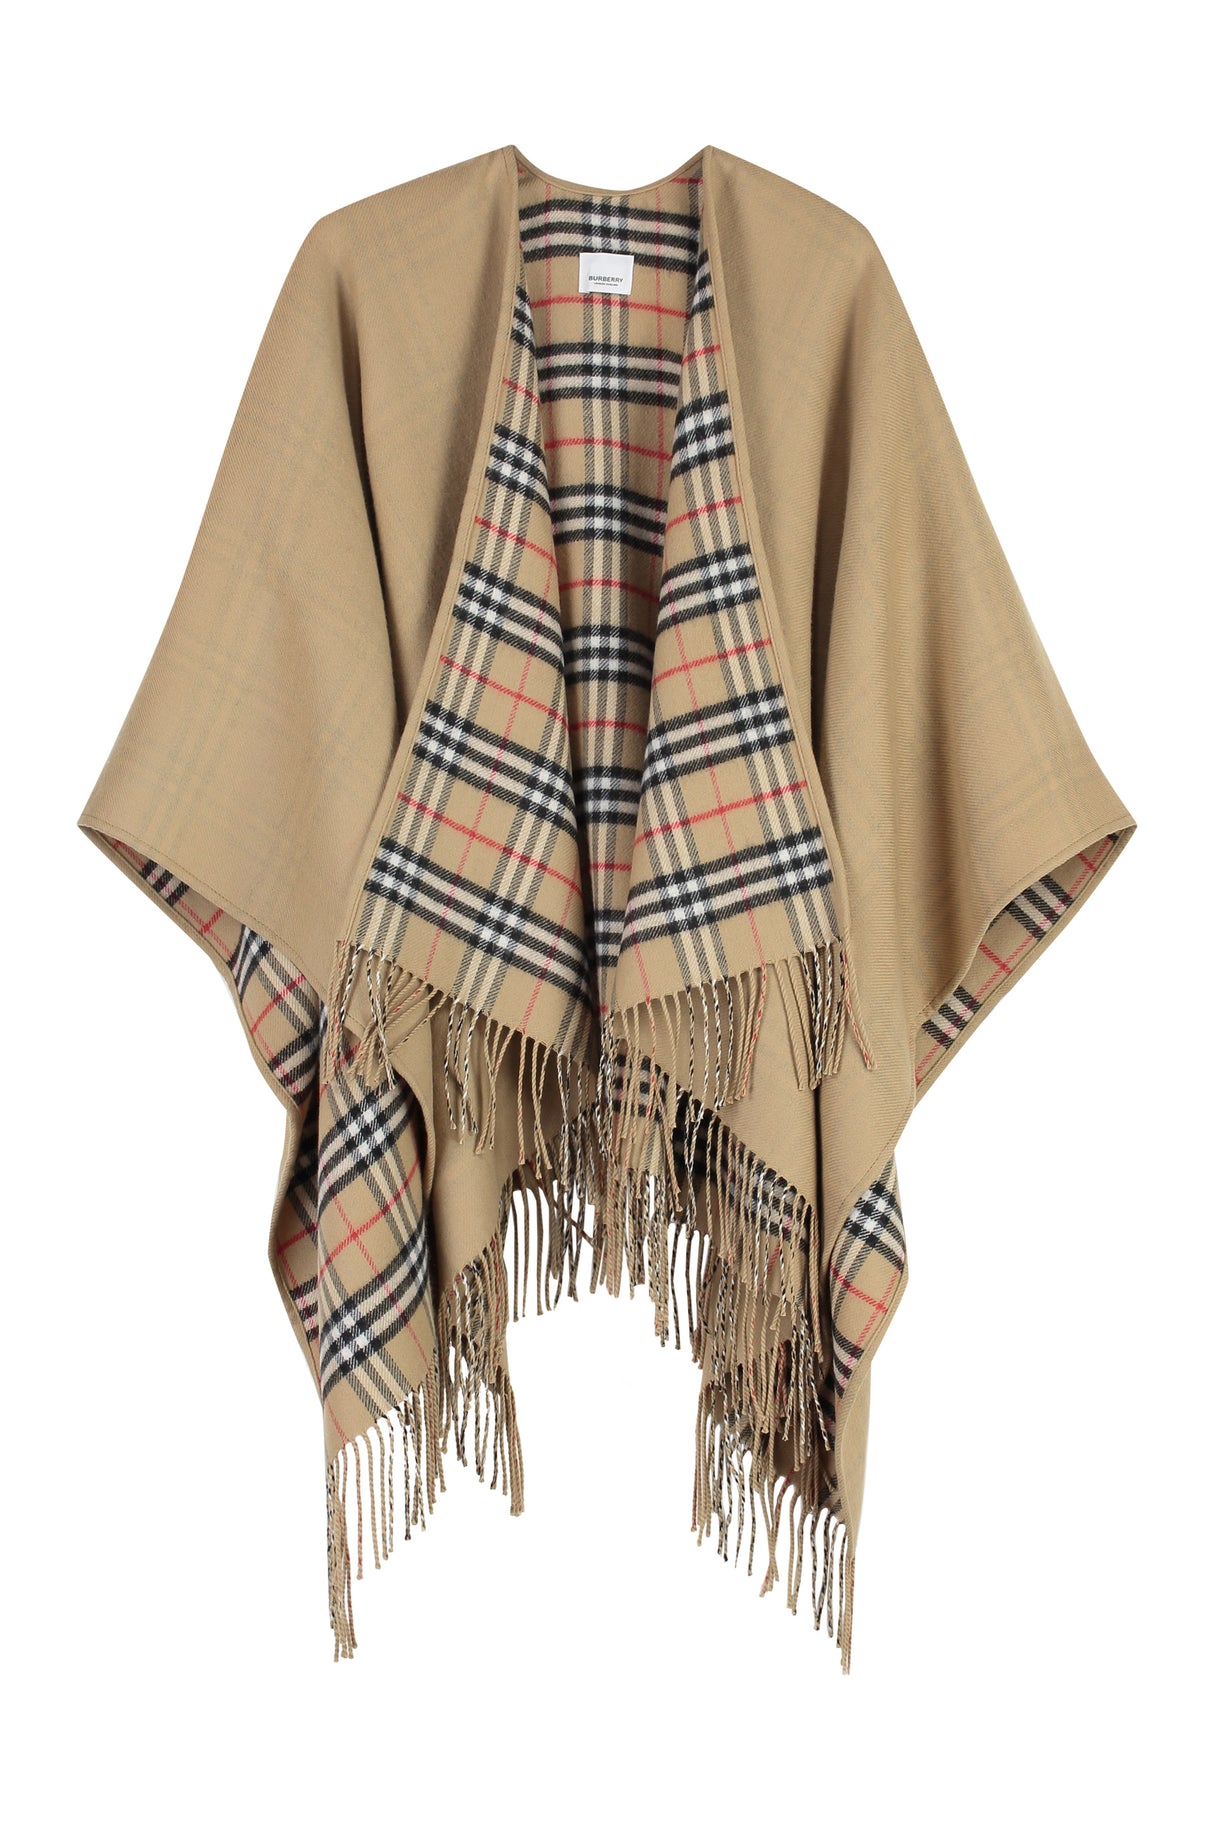 BURBERRY Reversible Check Wool Cape for Women - Beige